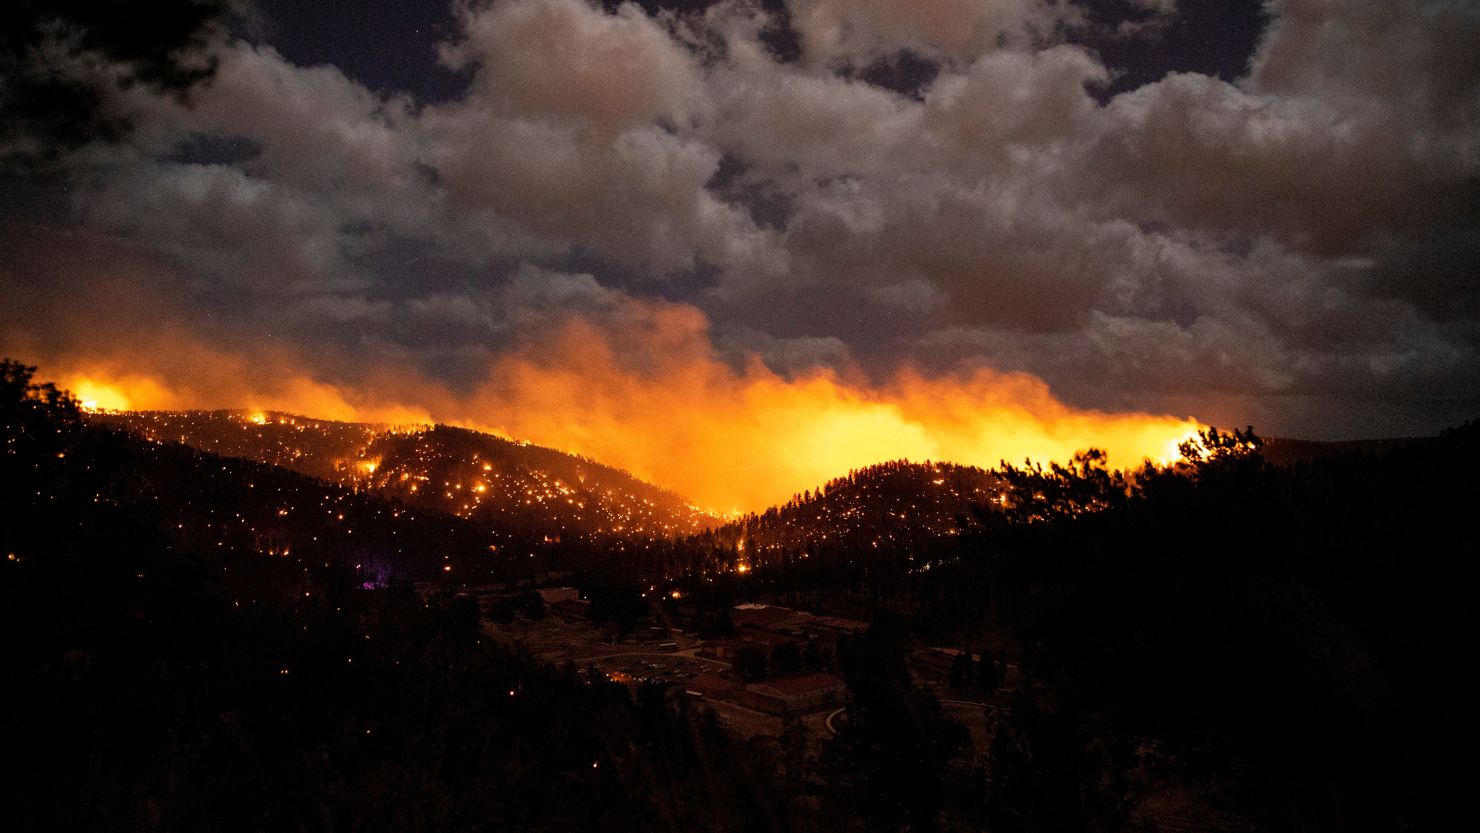 The McBride Fire seen burning in Ruidoso, New Mexico, on April 12, 2022.